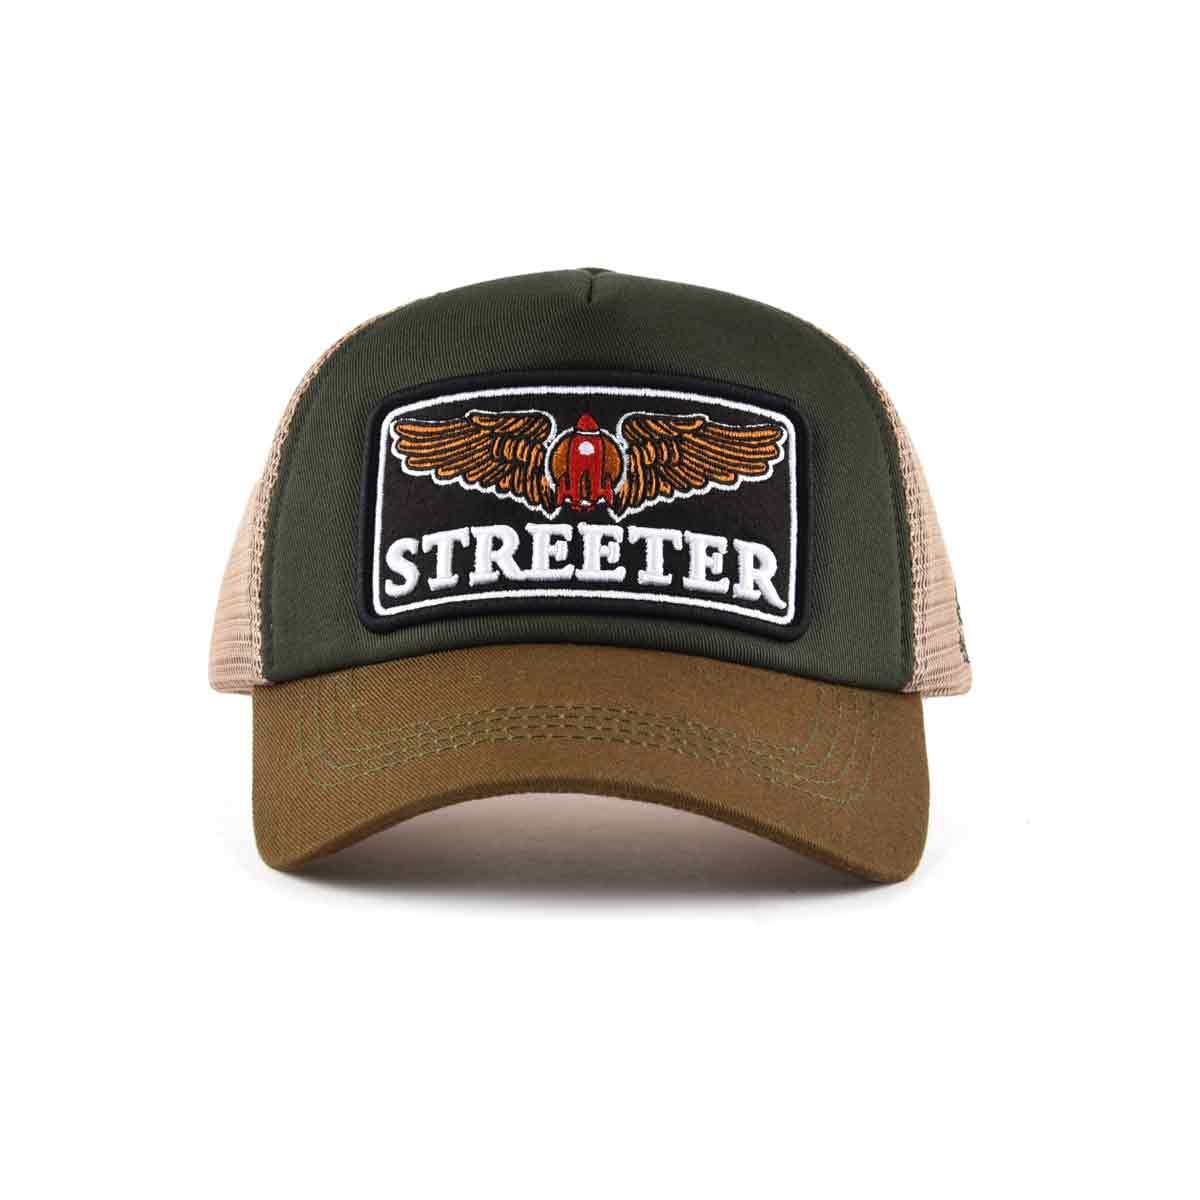 Streeter-green-brown-trucket-hat-men-with-a-curved-brim-KN2012093